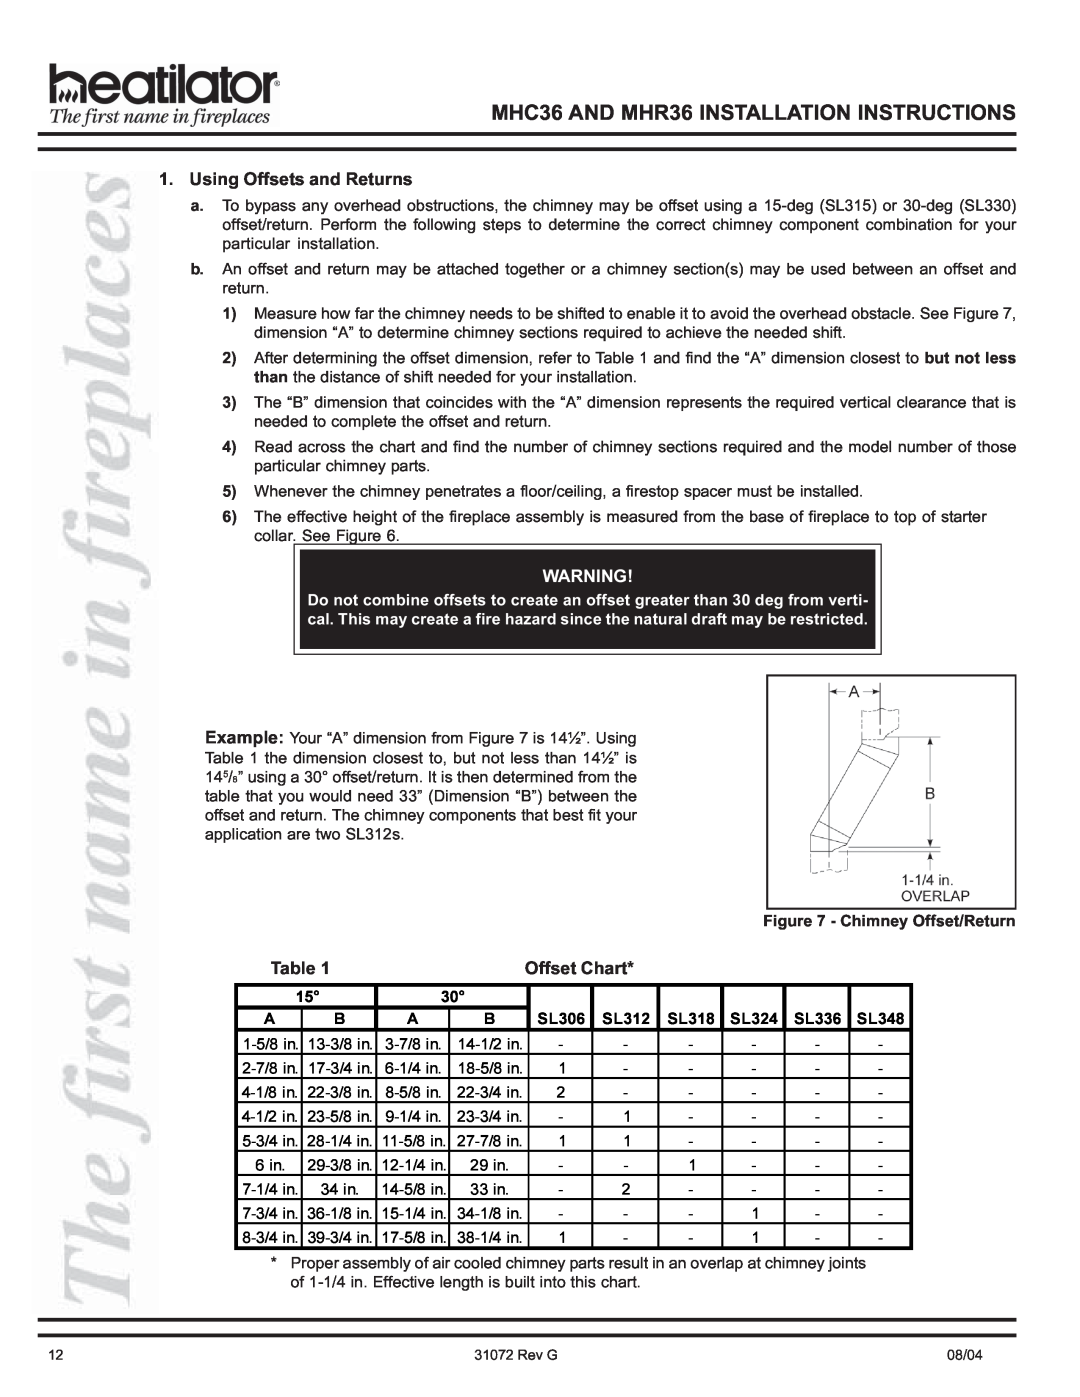 Heart & Home Collectables manual Using Offsets and Returns, Offset Chart, MHC36 AND MHR36 INSTALLATION INSTRUCTIONS 